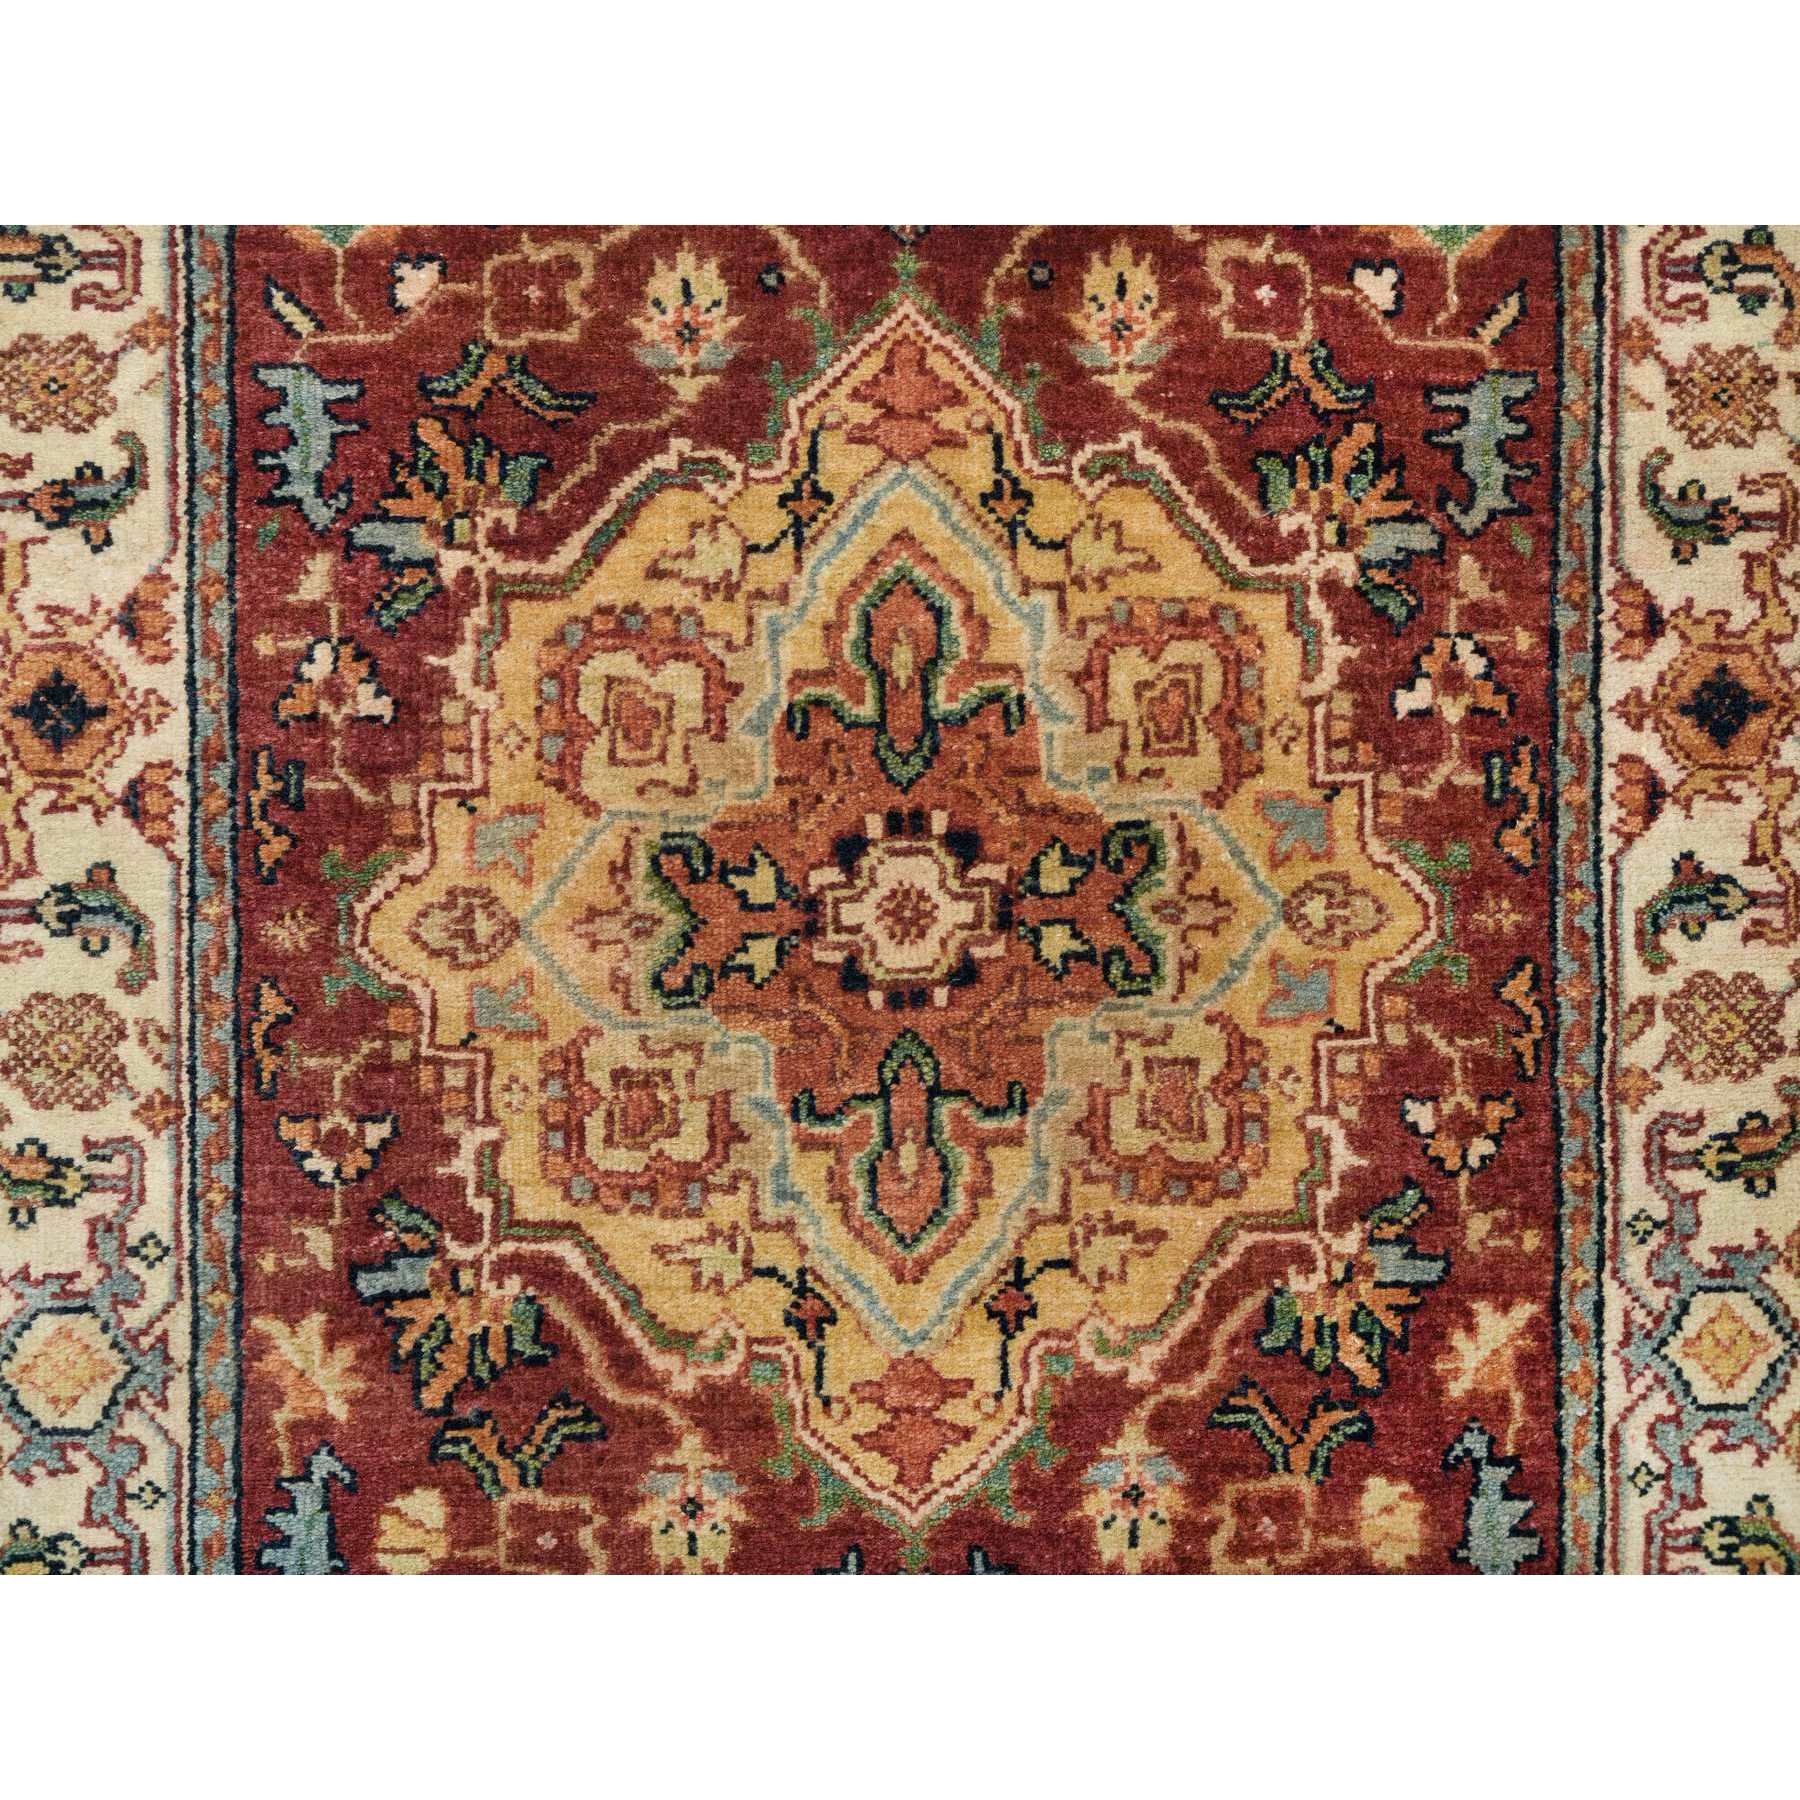 2'6"x23'10" Terracotta Red, Antiqued Fine Heriz Re-Creation, Natural Dyes Densely Woven, Natural Wool Hand Woven, Runner Oriental Rug 